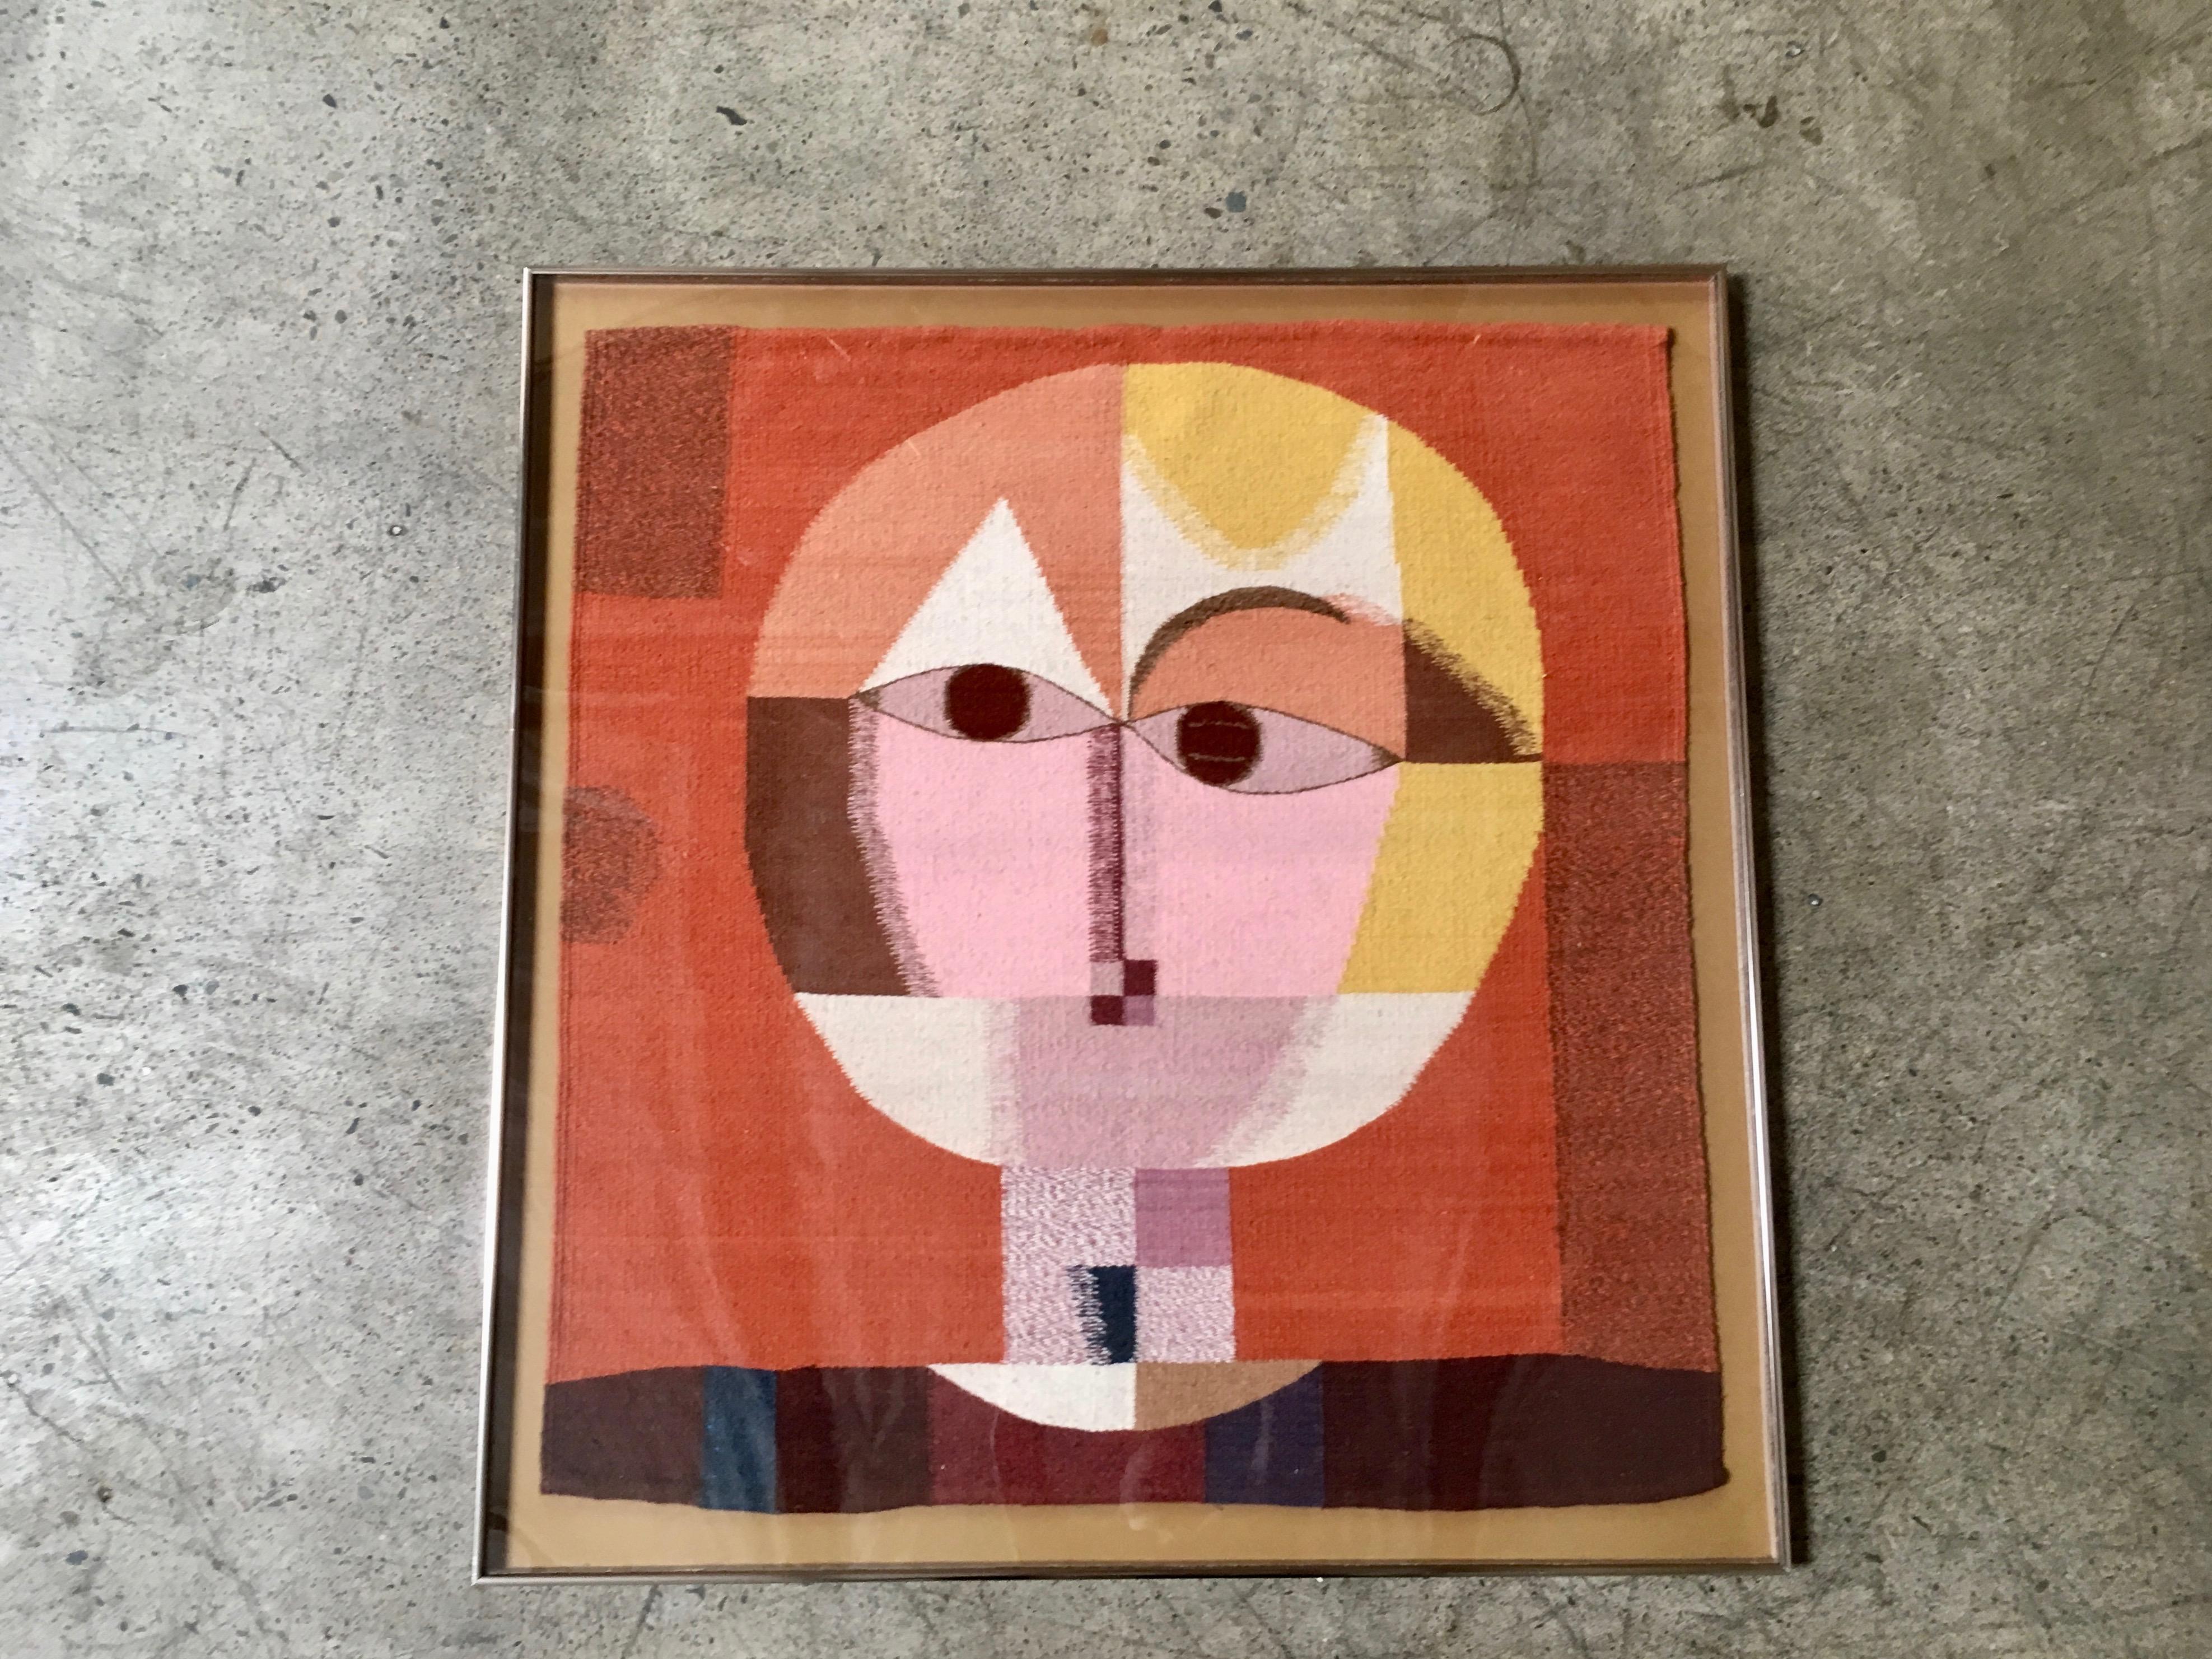 North American 1970s Fiber Art in the Style of Paul Klee